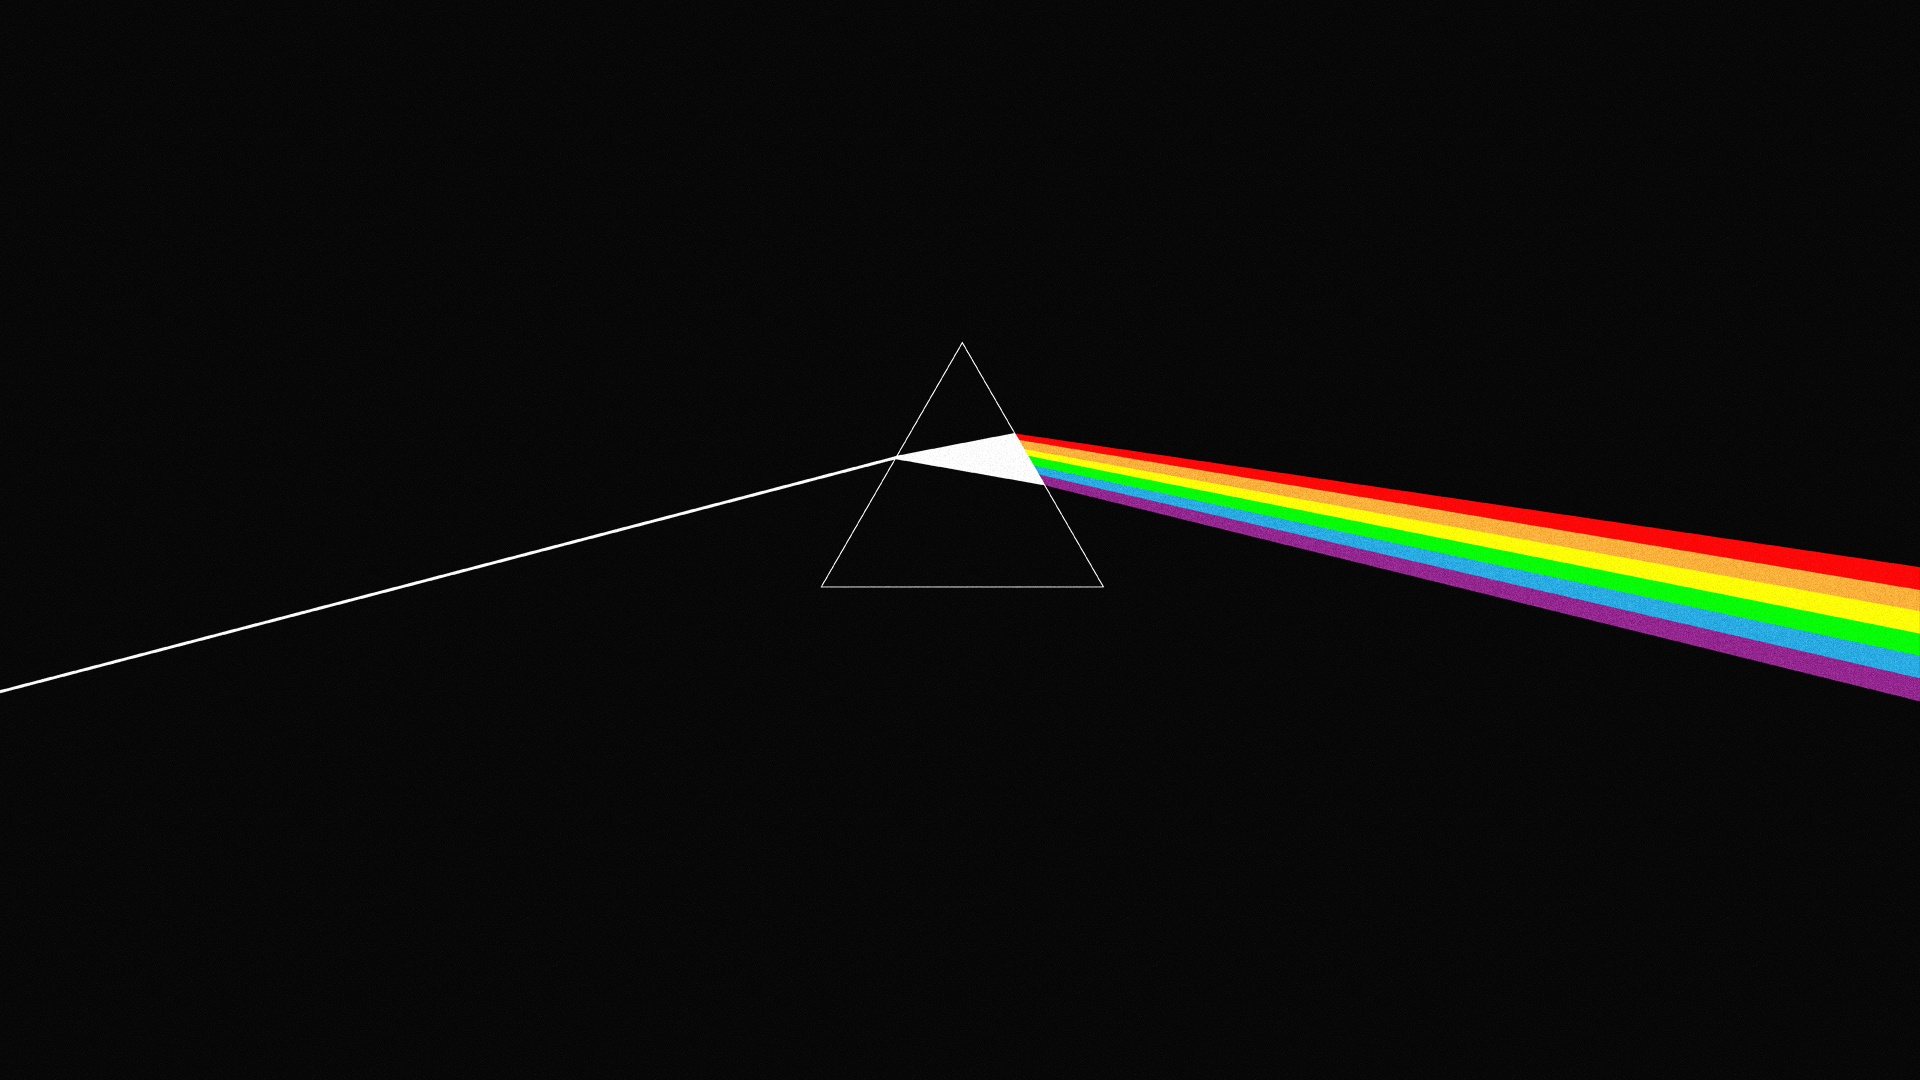 Dark Side Pink Floyd Wallpaper HD And Images cute Wallpapers 1920x1080